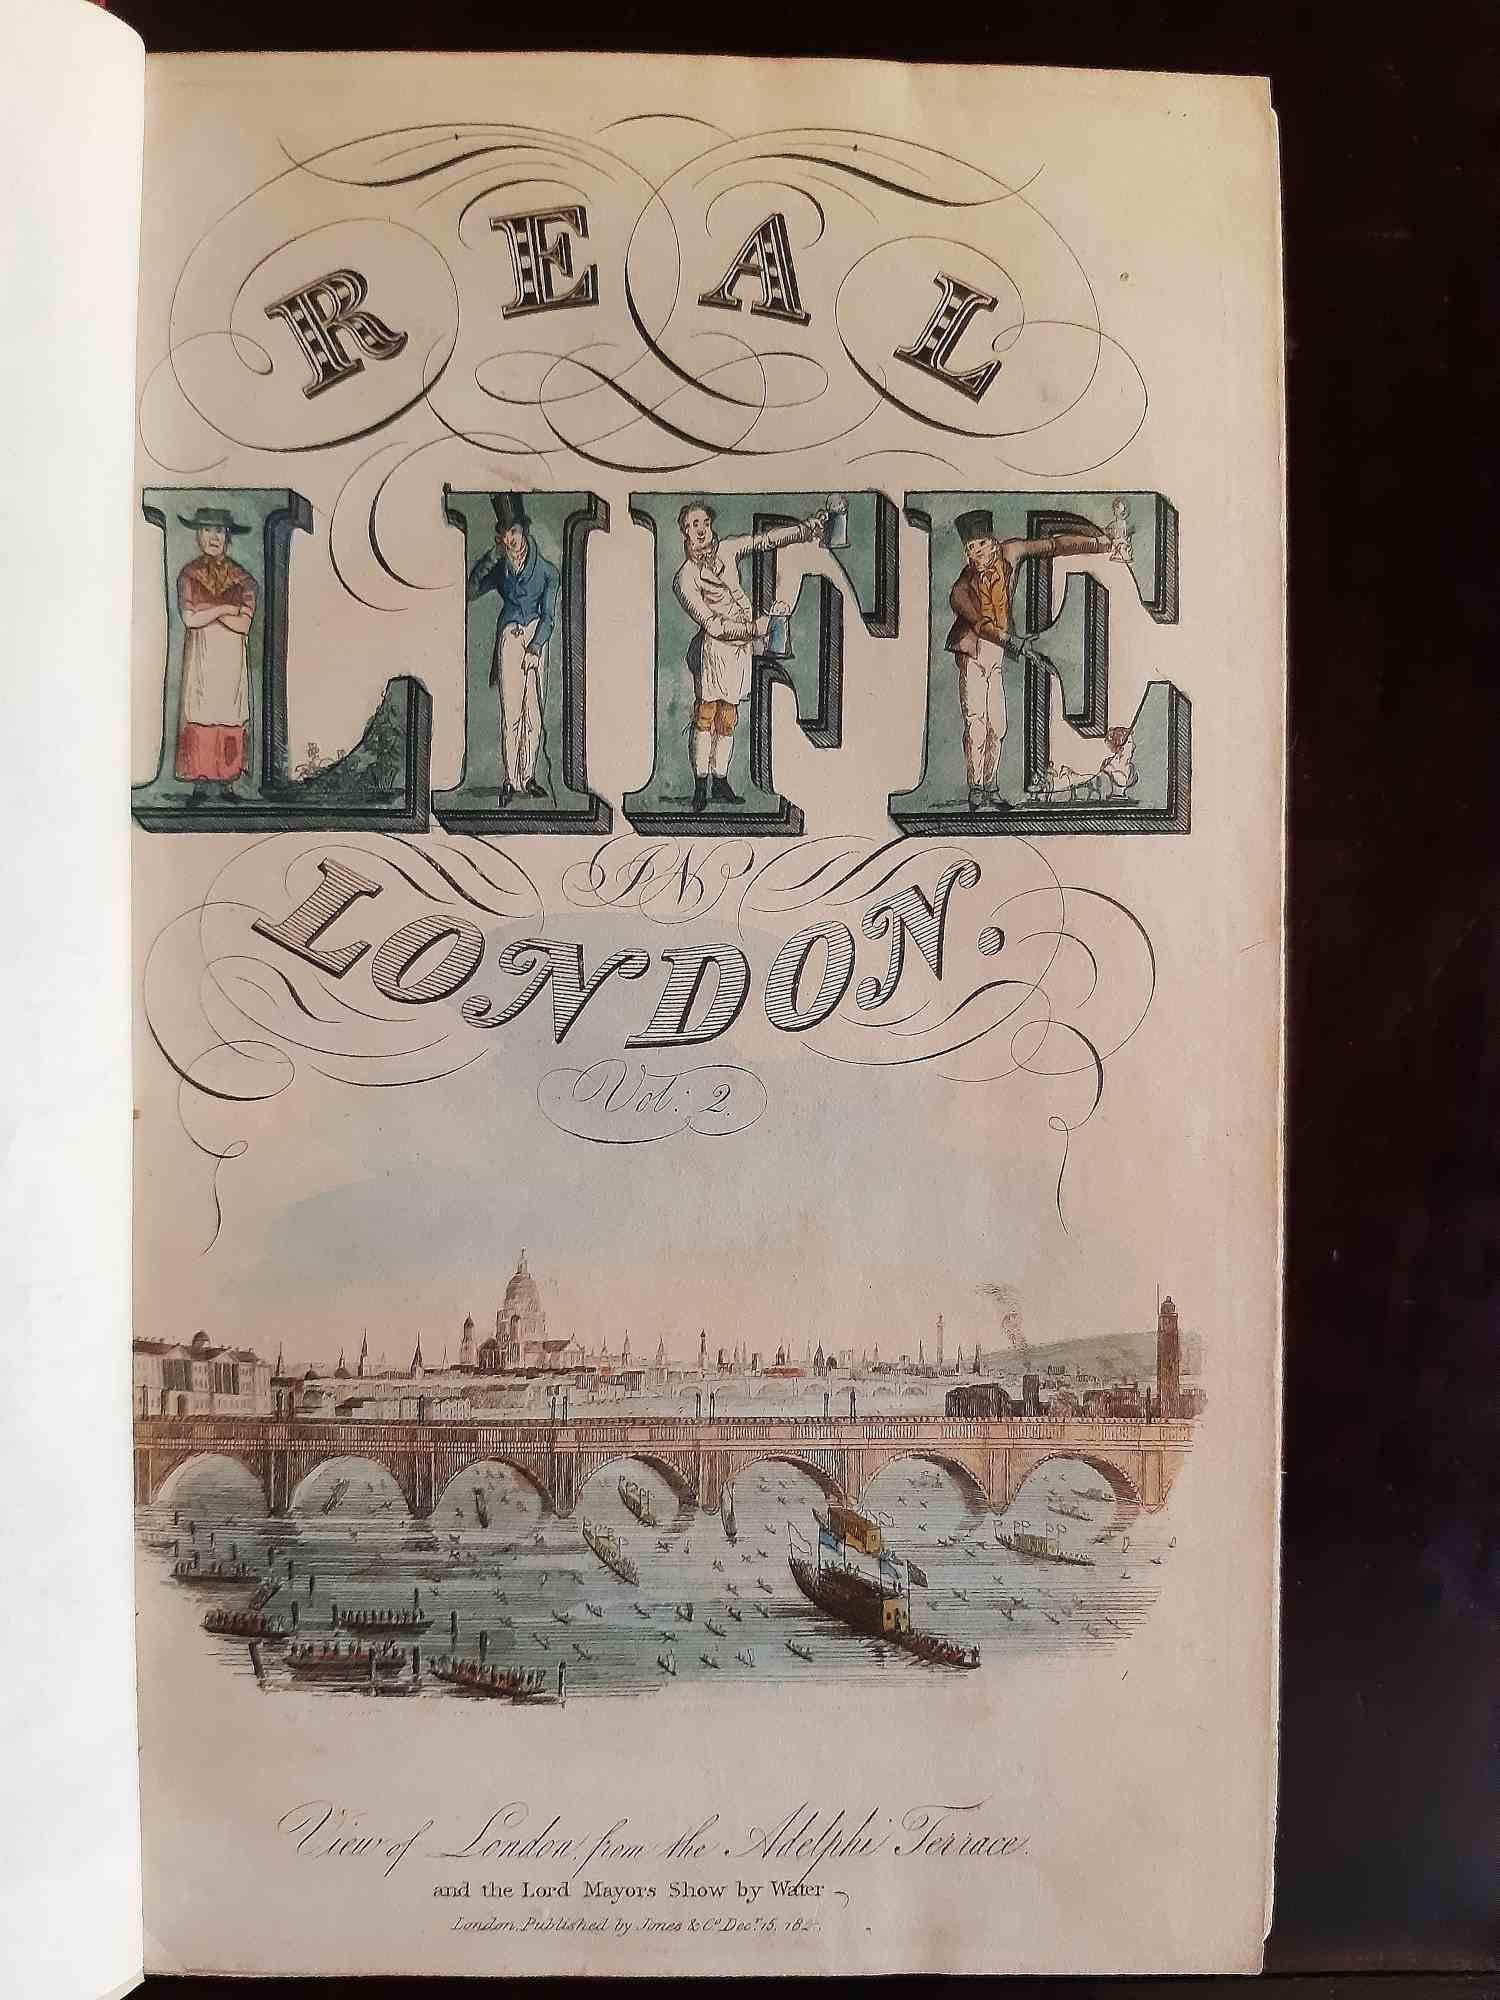 Real Life in London - Rare Book Illustrated by T. Rowlandson - 1820s For Sale 1